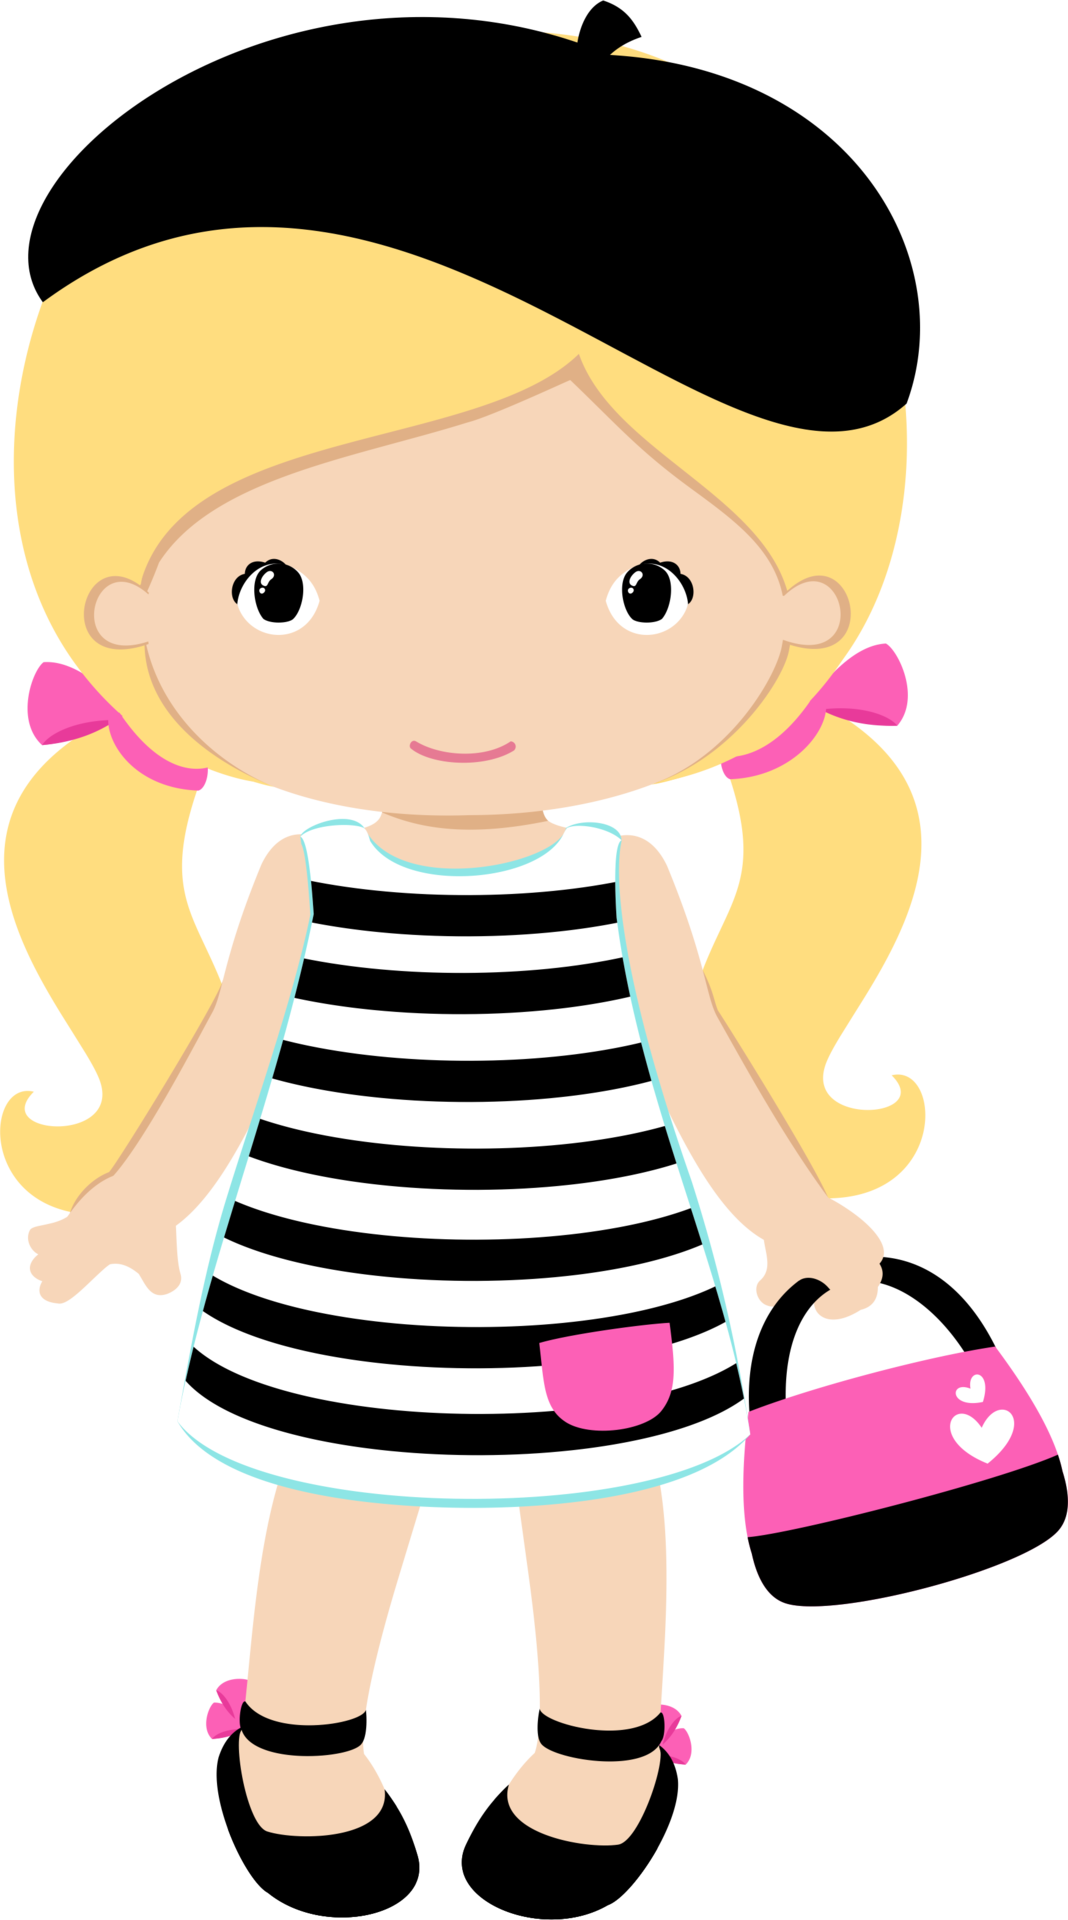  shared ver todas. Crowns clipart girly